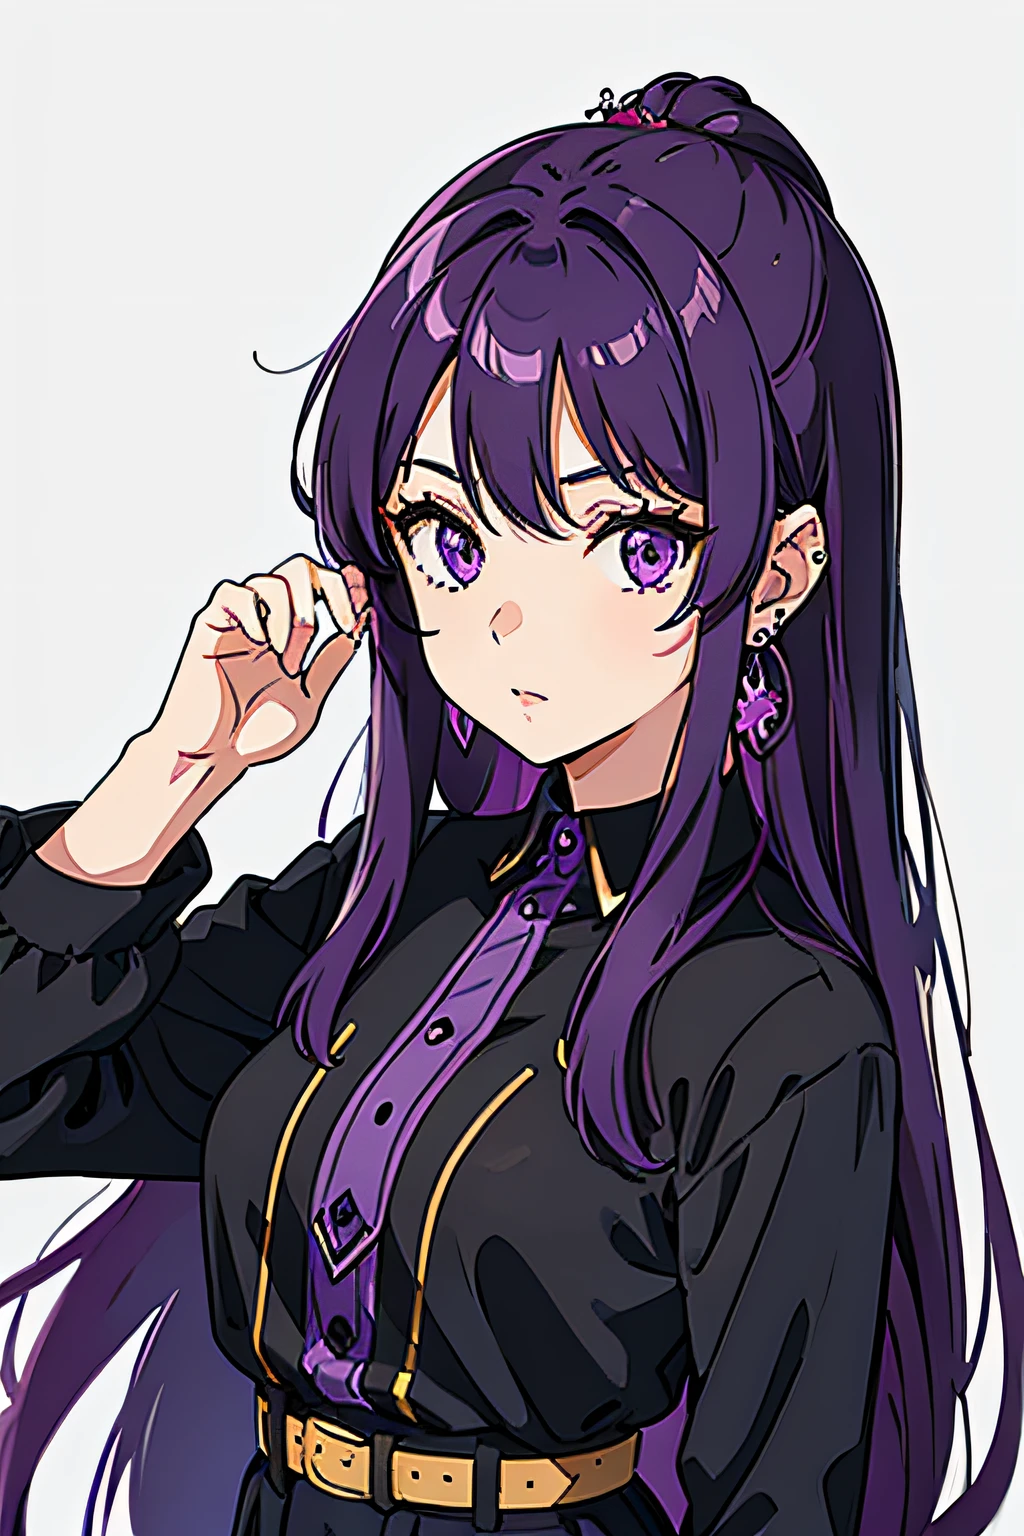 A girl with long purple hair, purple eyes, ear rings, and a smart look.